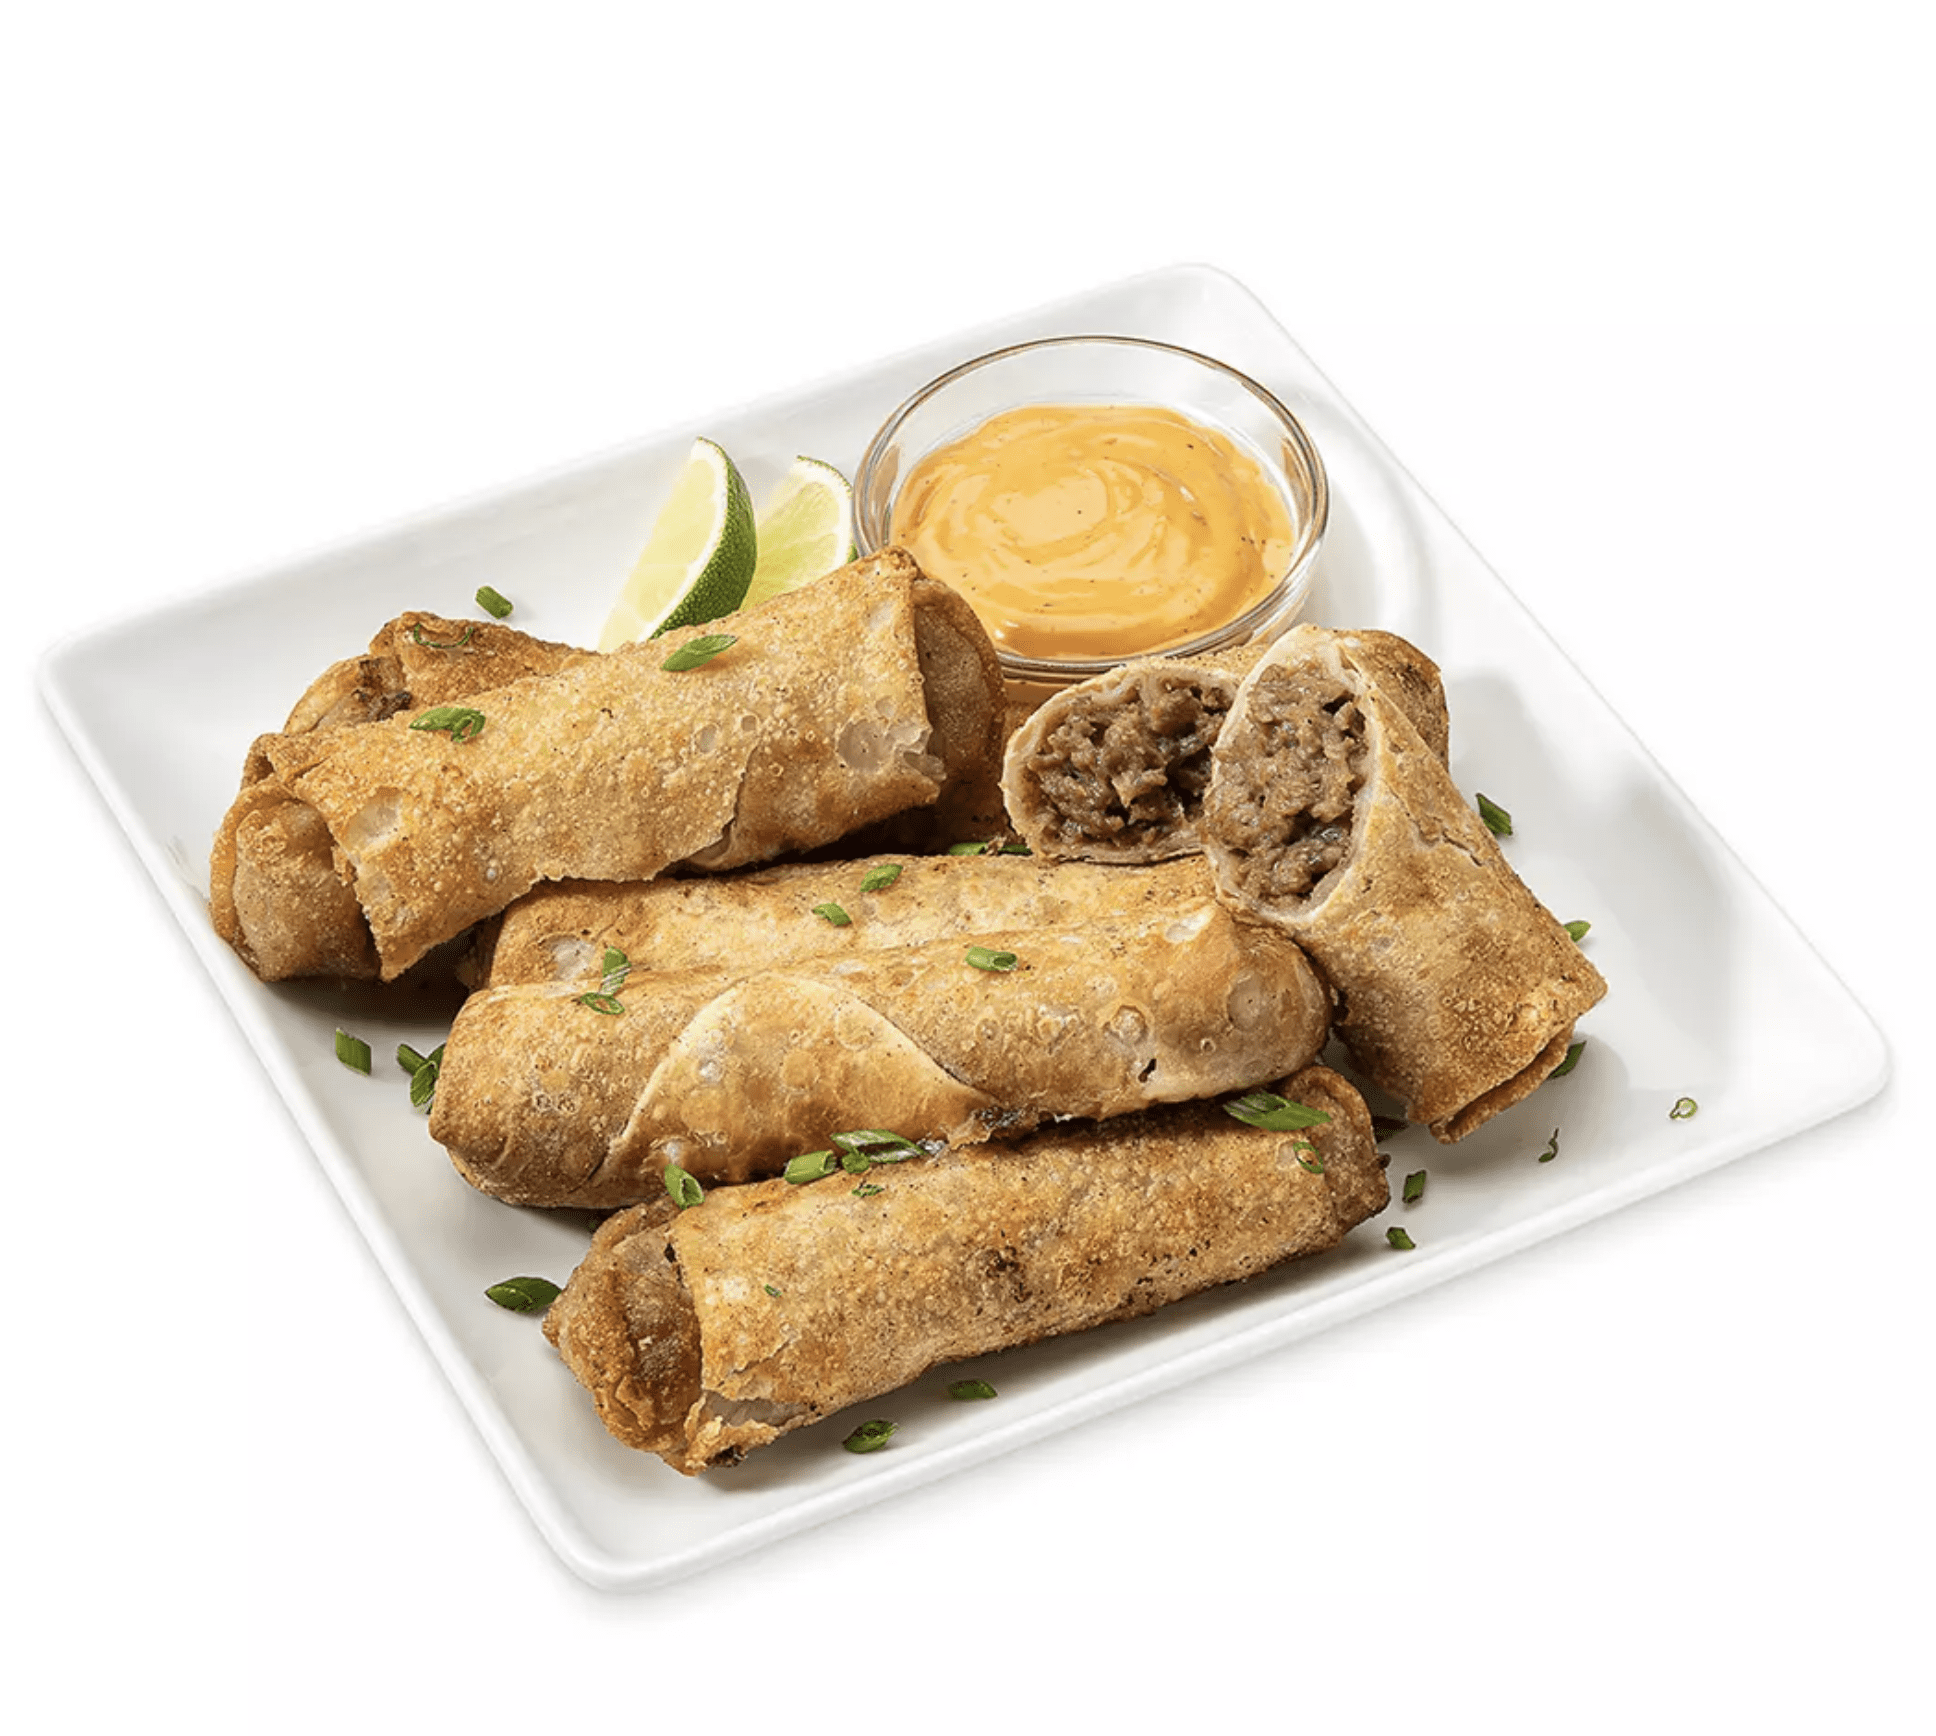 Coupon Stack for Wellsley Farms Steak & Cheese Eggrolls at BJ’s